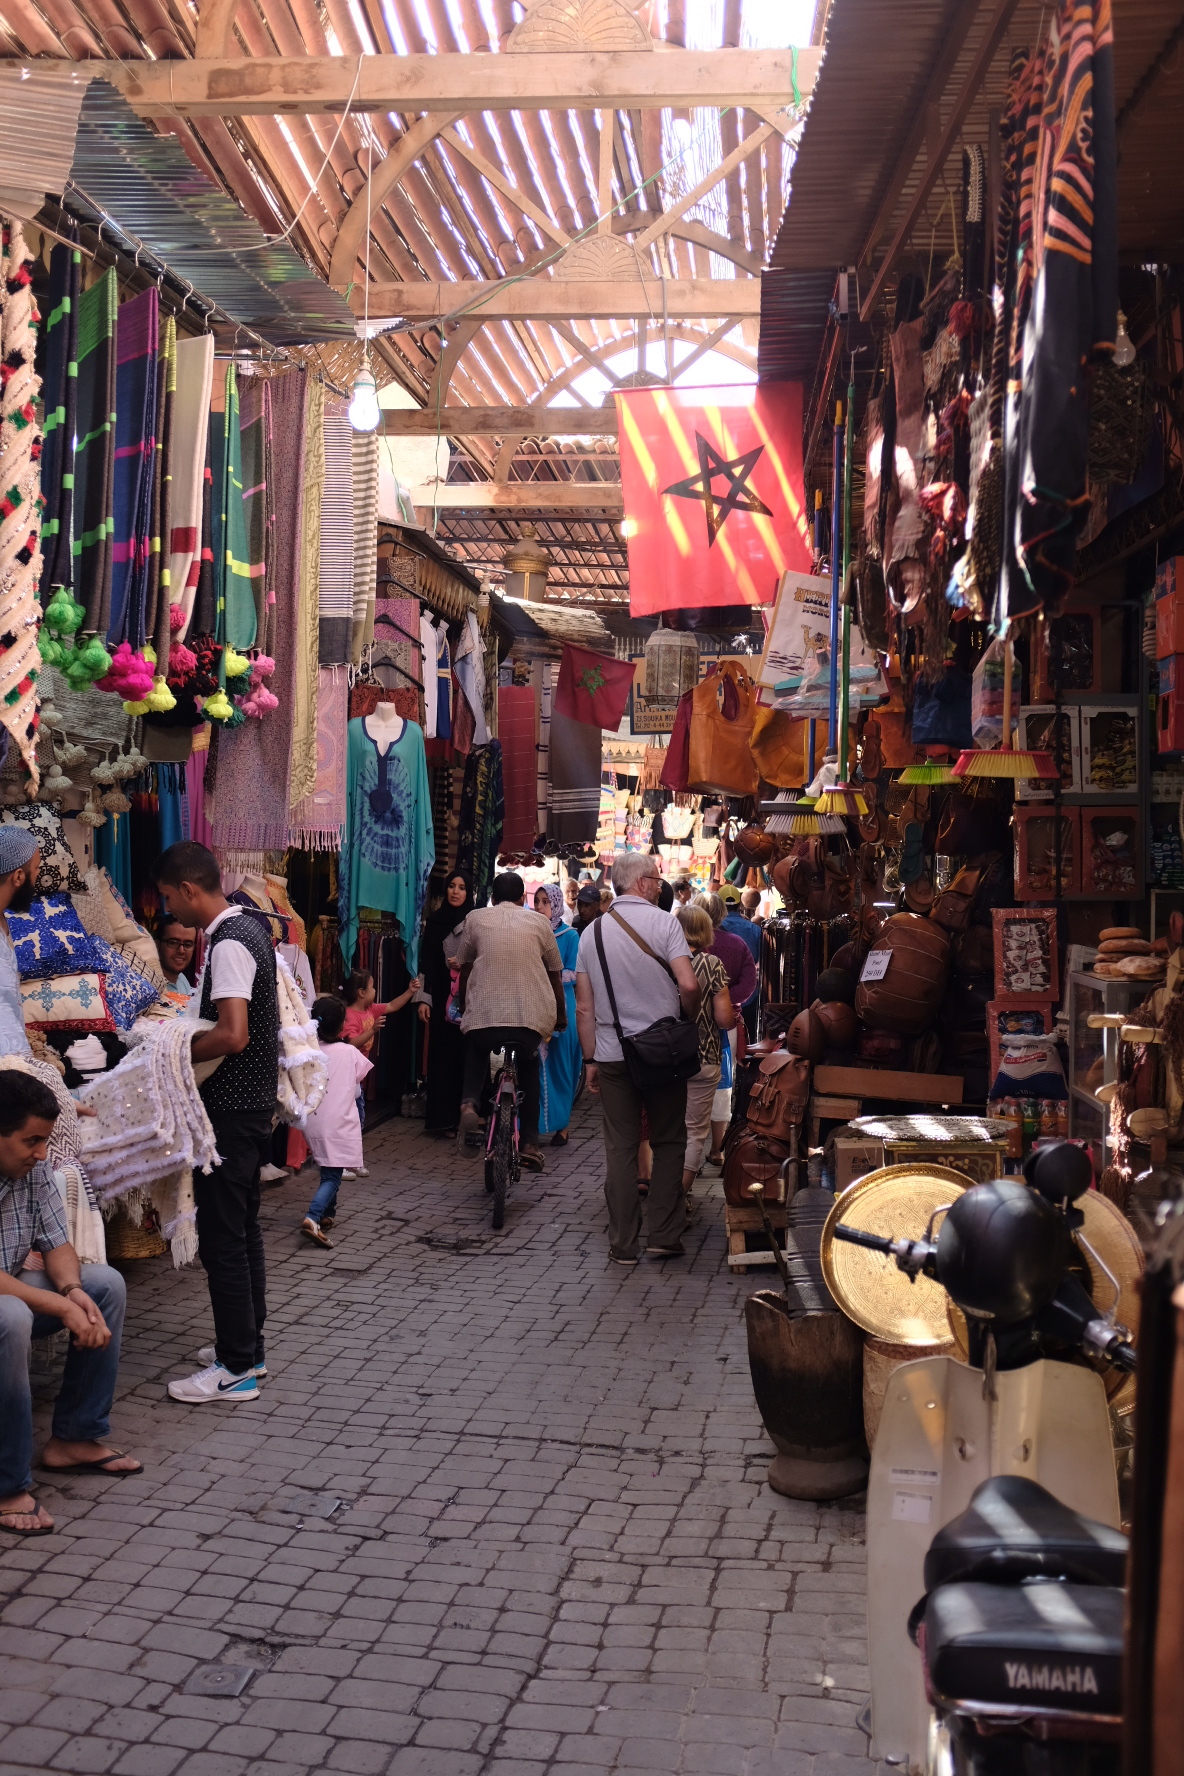  Marketplace in Fes 